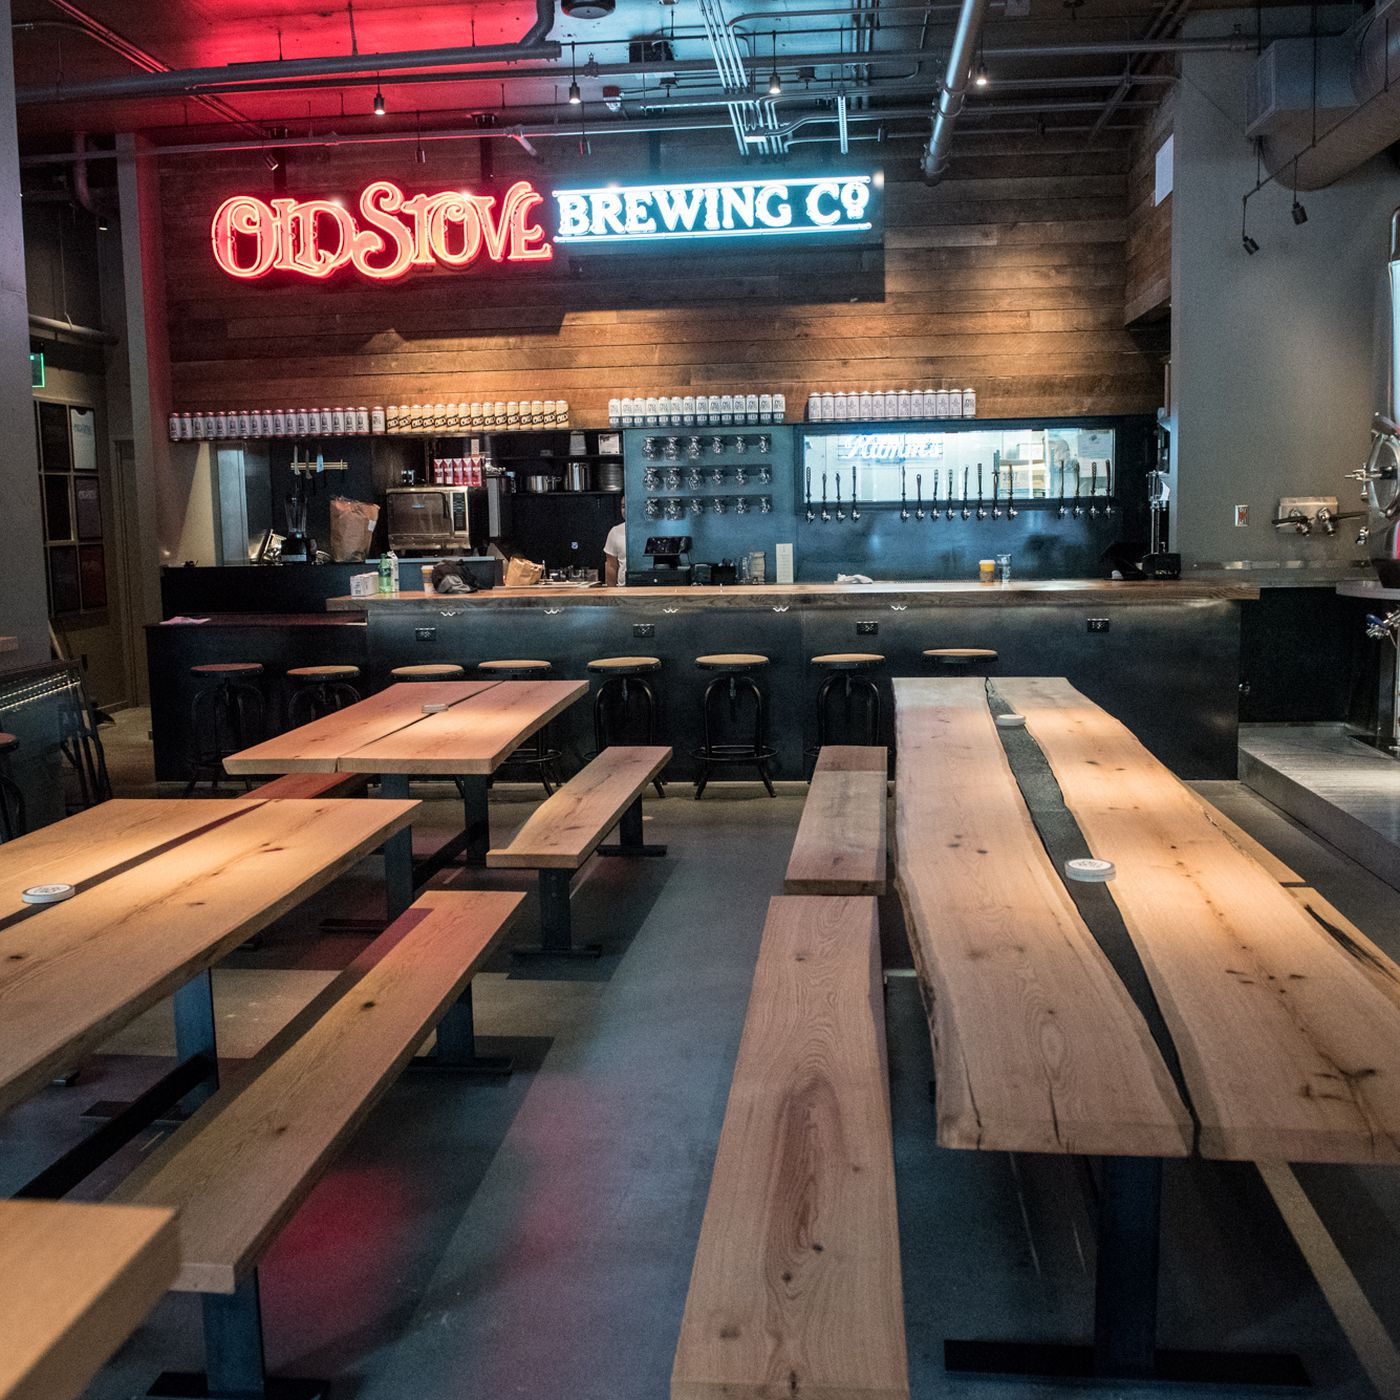 25 Stunning Hardwood Floor Installation Denver 2024 free download hardwood floor installation denver of tour inside old stove brewing now open in pike place market eater with regard to tour inside old stove brewing now open in pike place market eater seatt